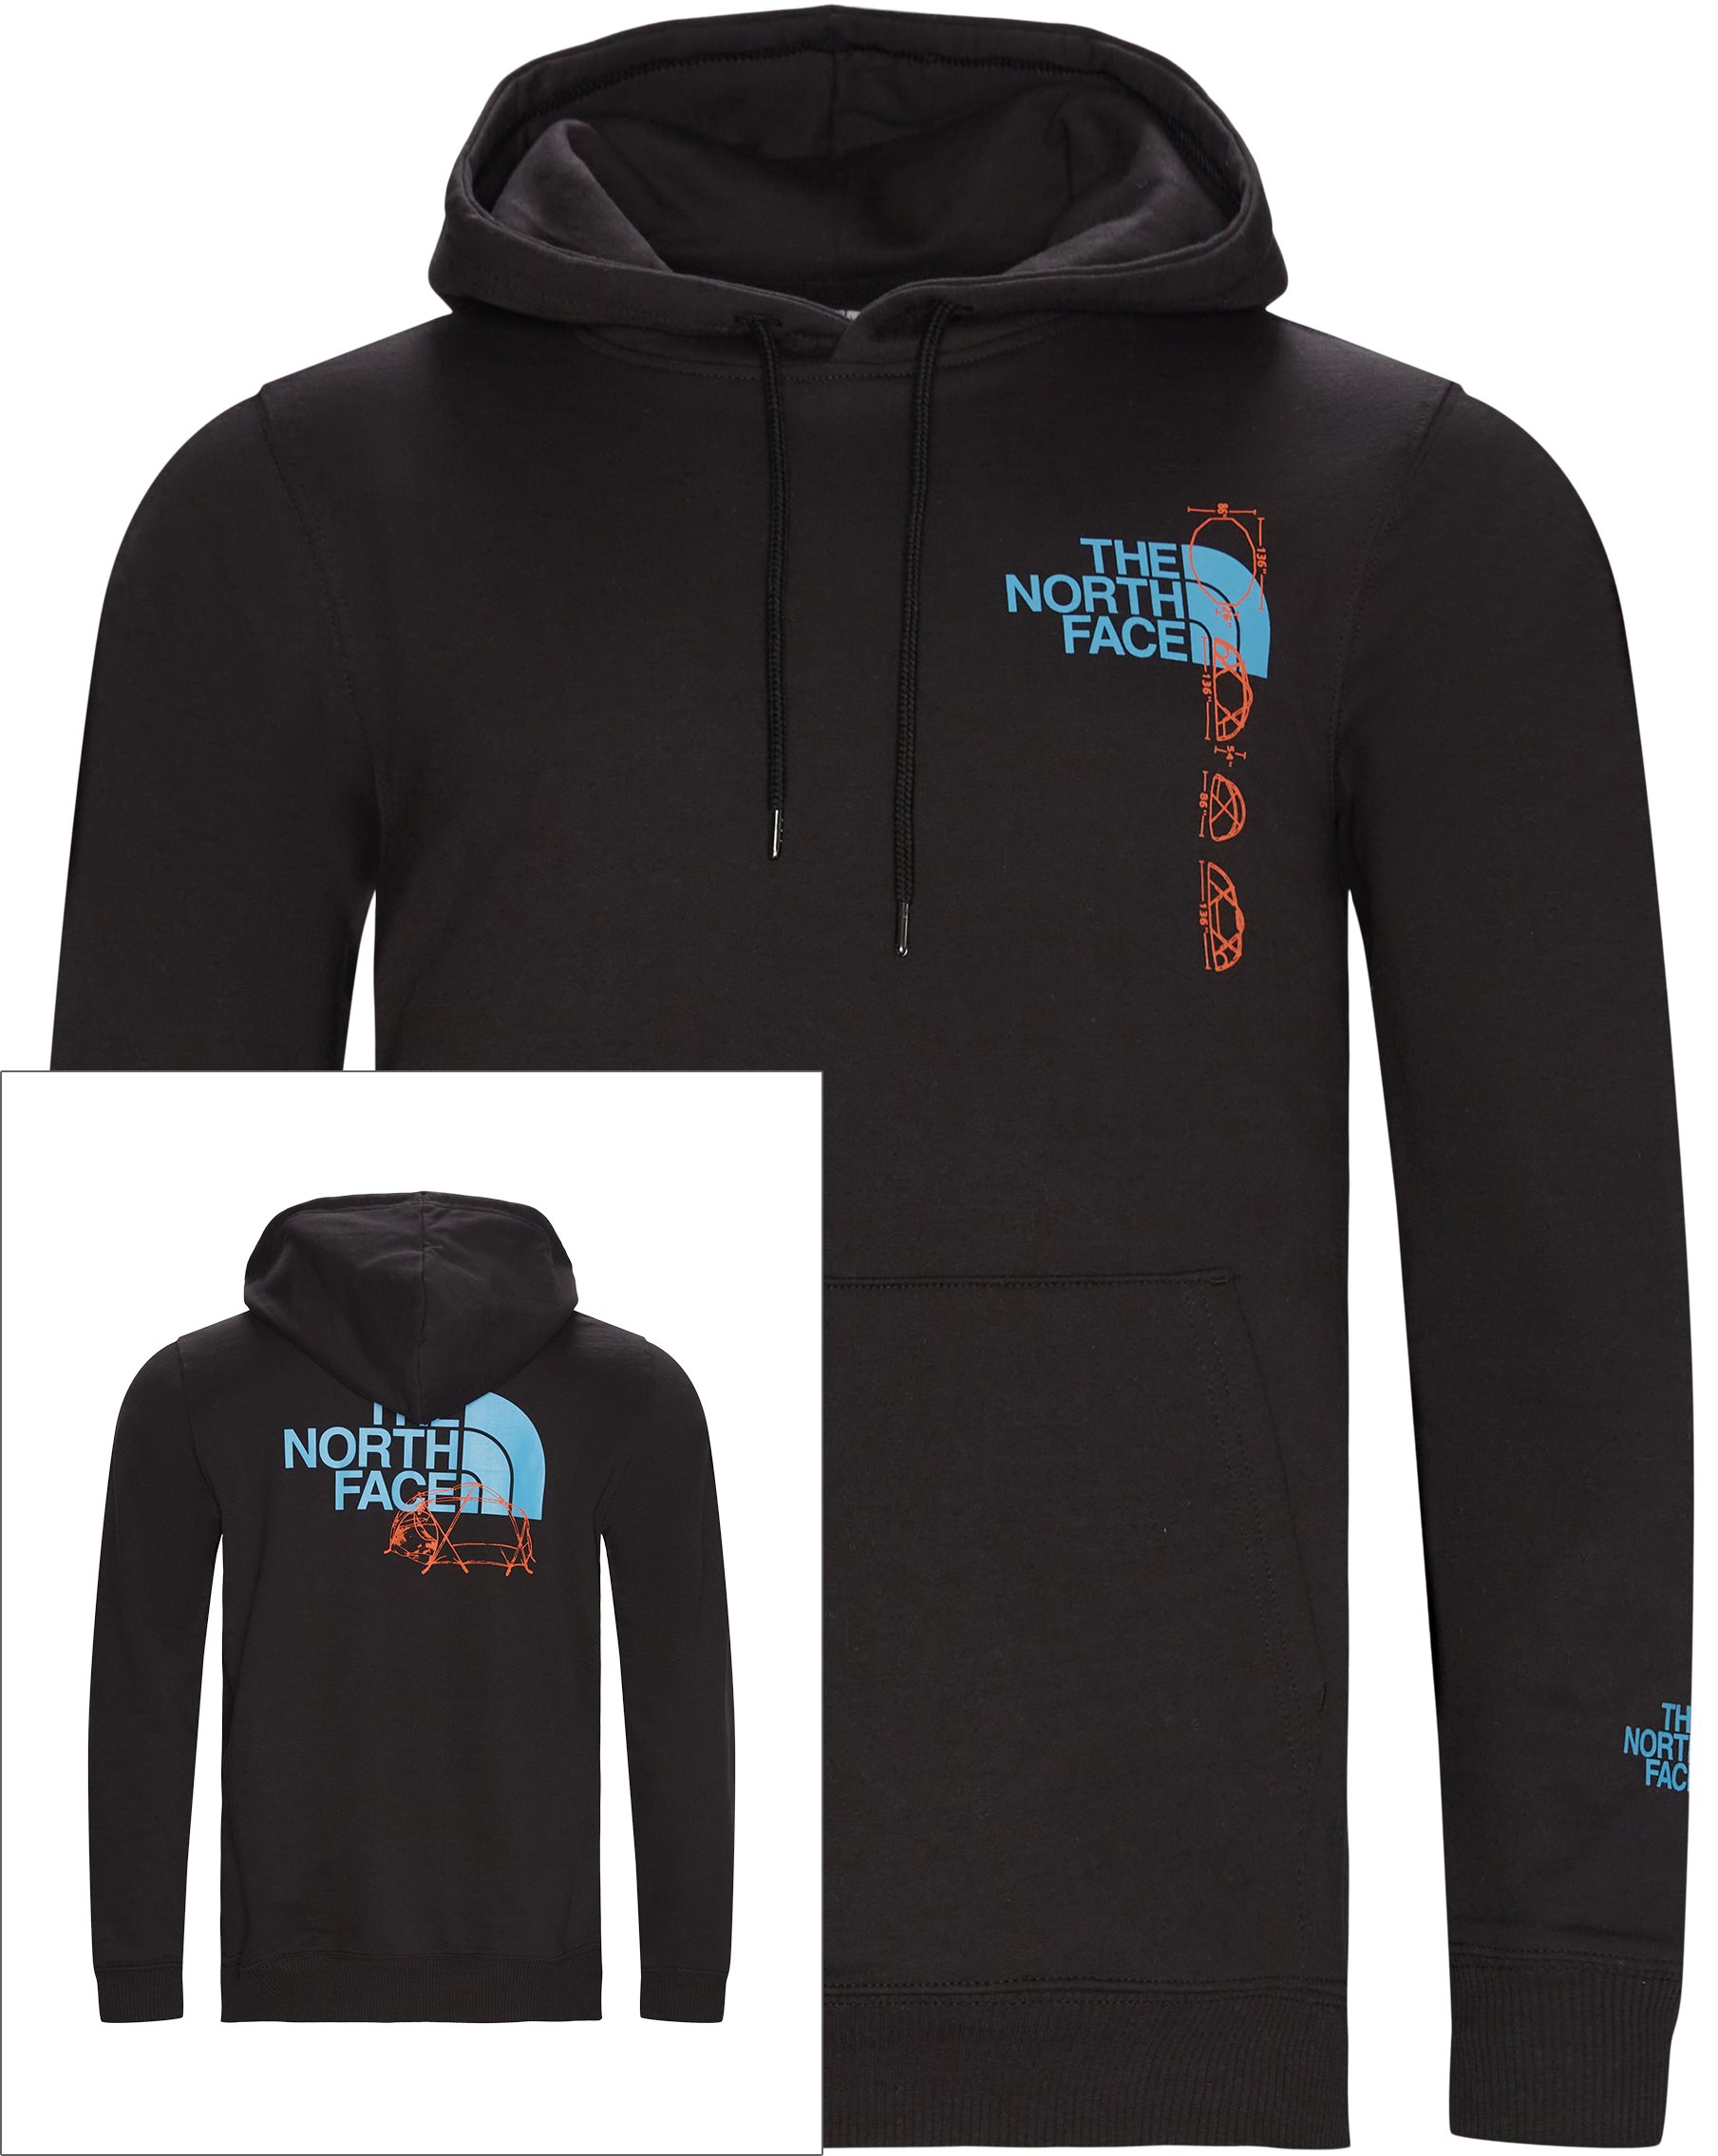 The North Face Sweatshirts RECYC EXPED HDY Black